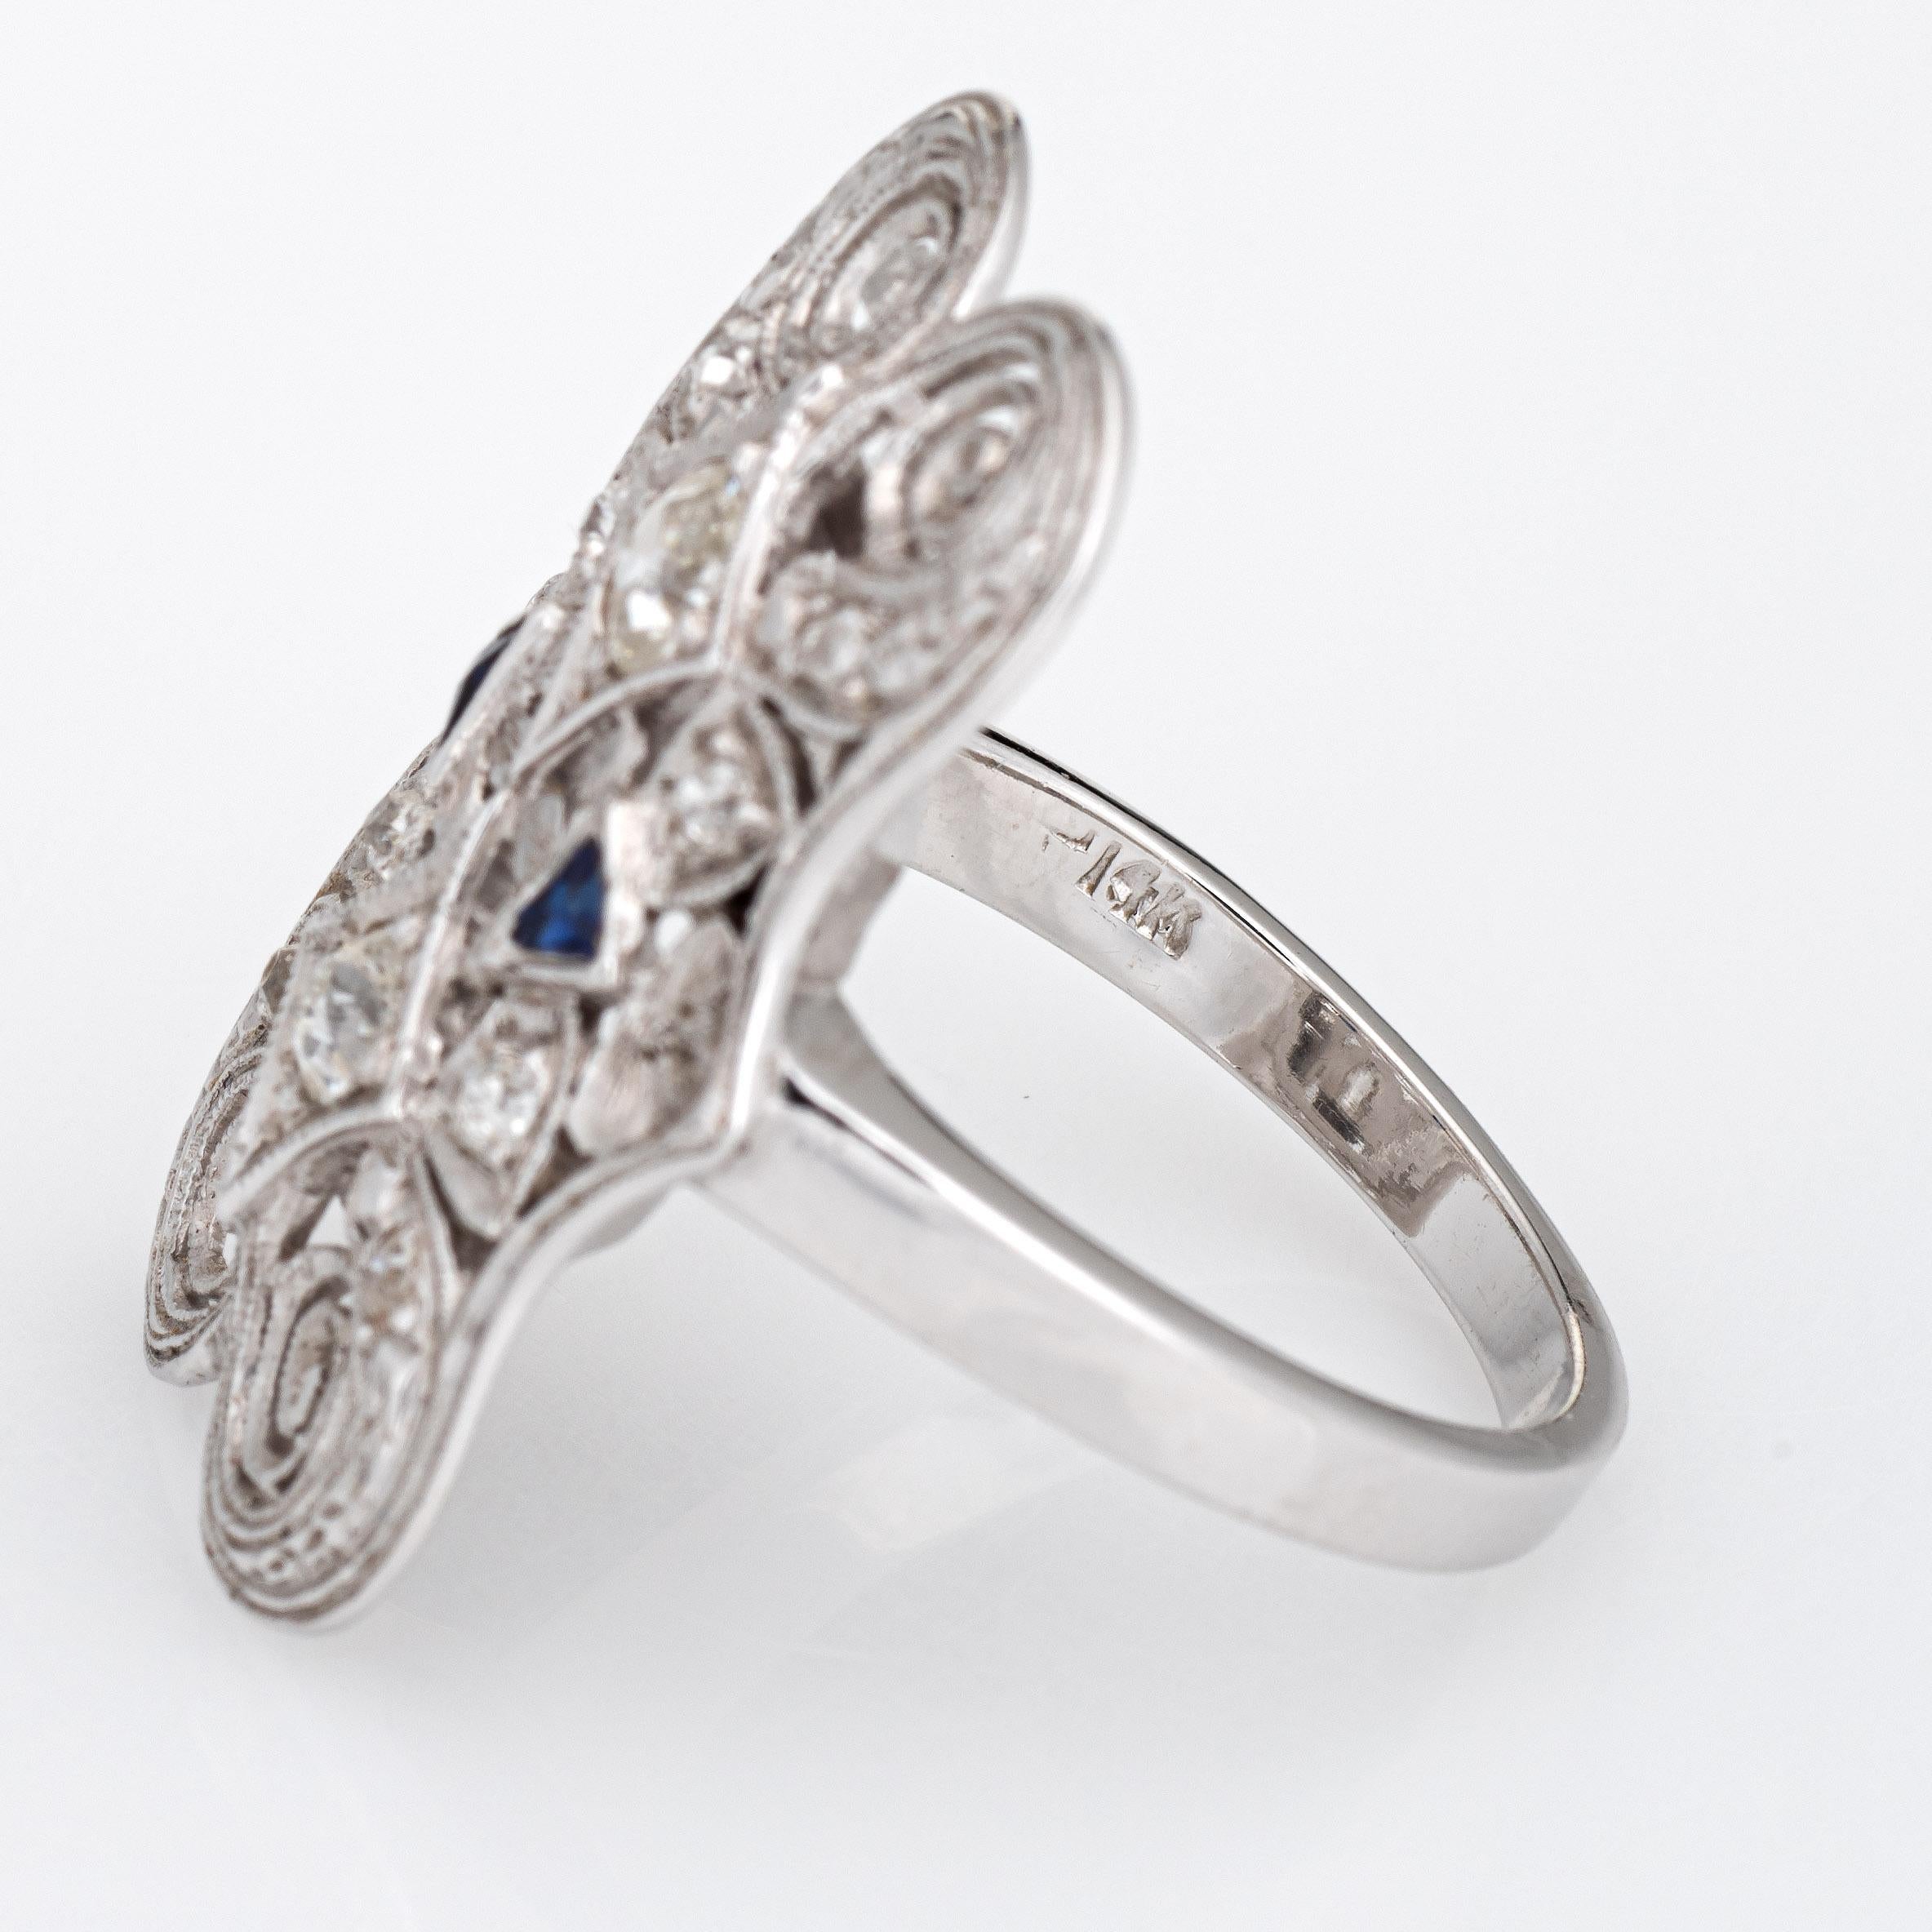 Vintage Art Deco Diamond Sapphire Ring 14k White Gold Filigree 6 Dinner Jewelry In Good Condition For Sale In Torrance, CA